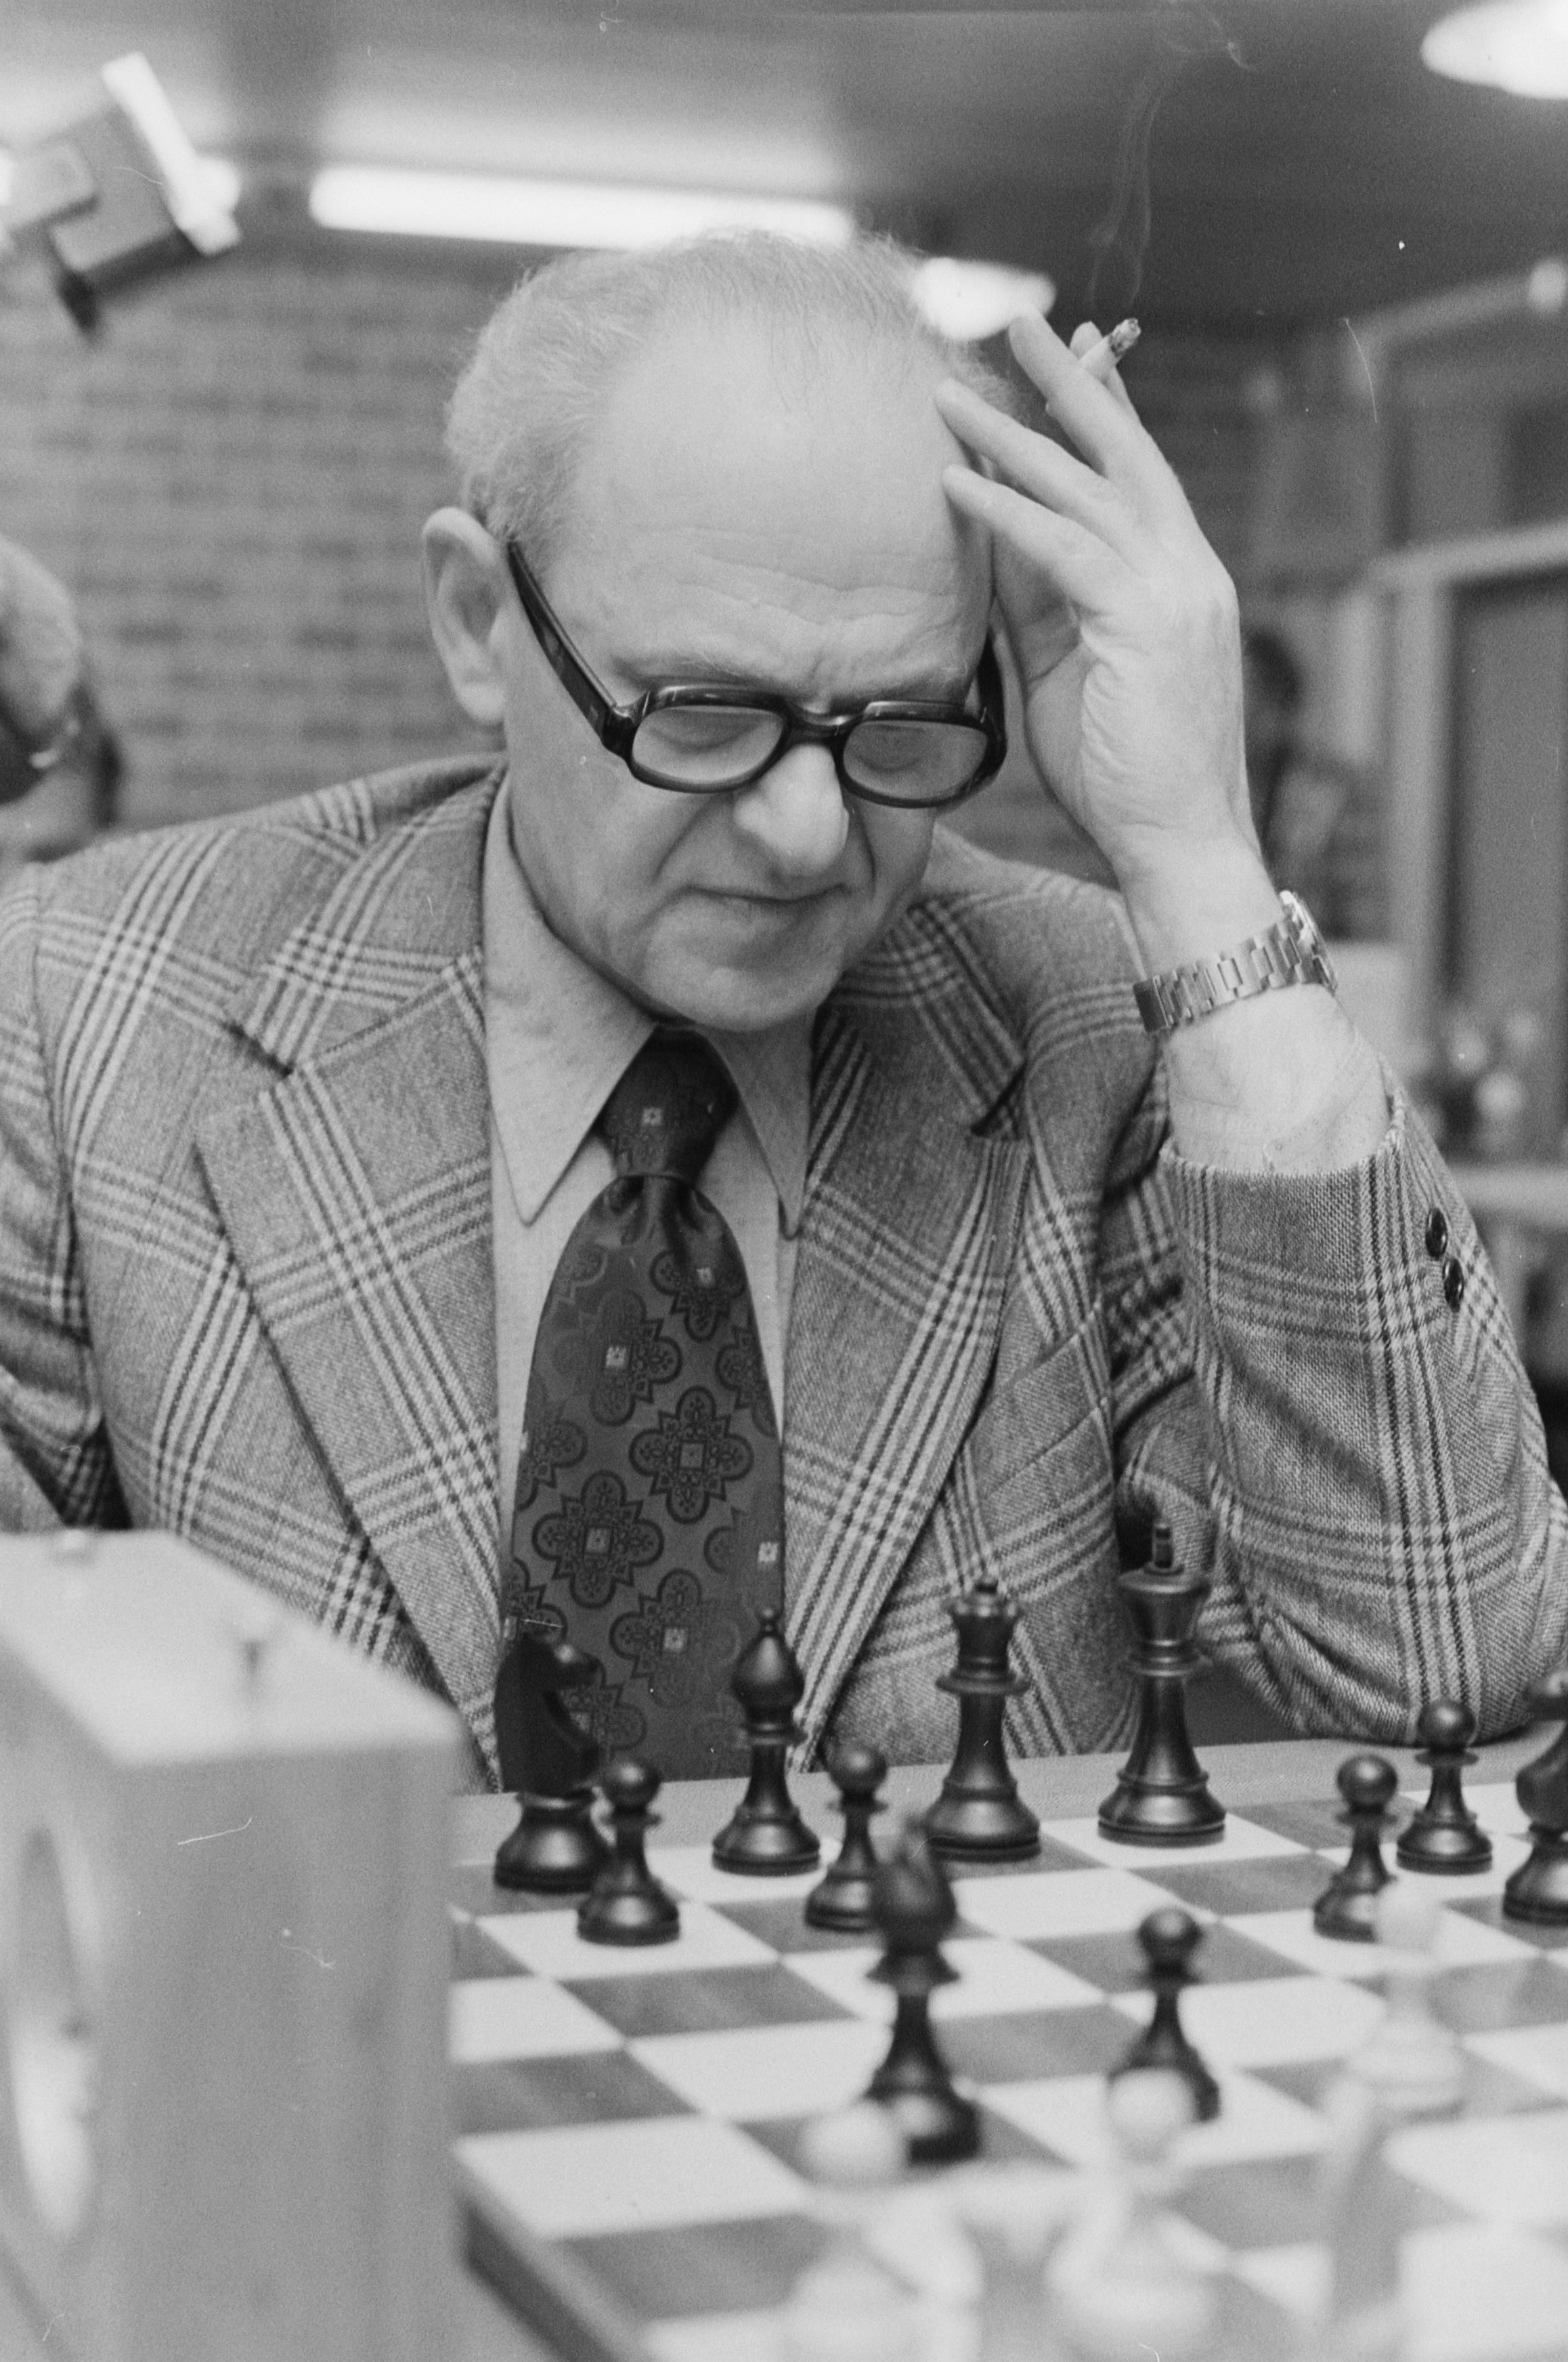 Botvinnik-Fischer (15th Olympiad, Varna 1962), with annotations by